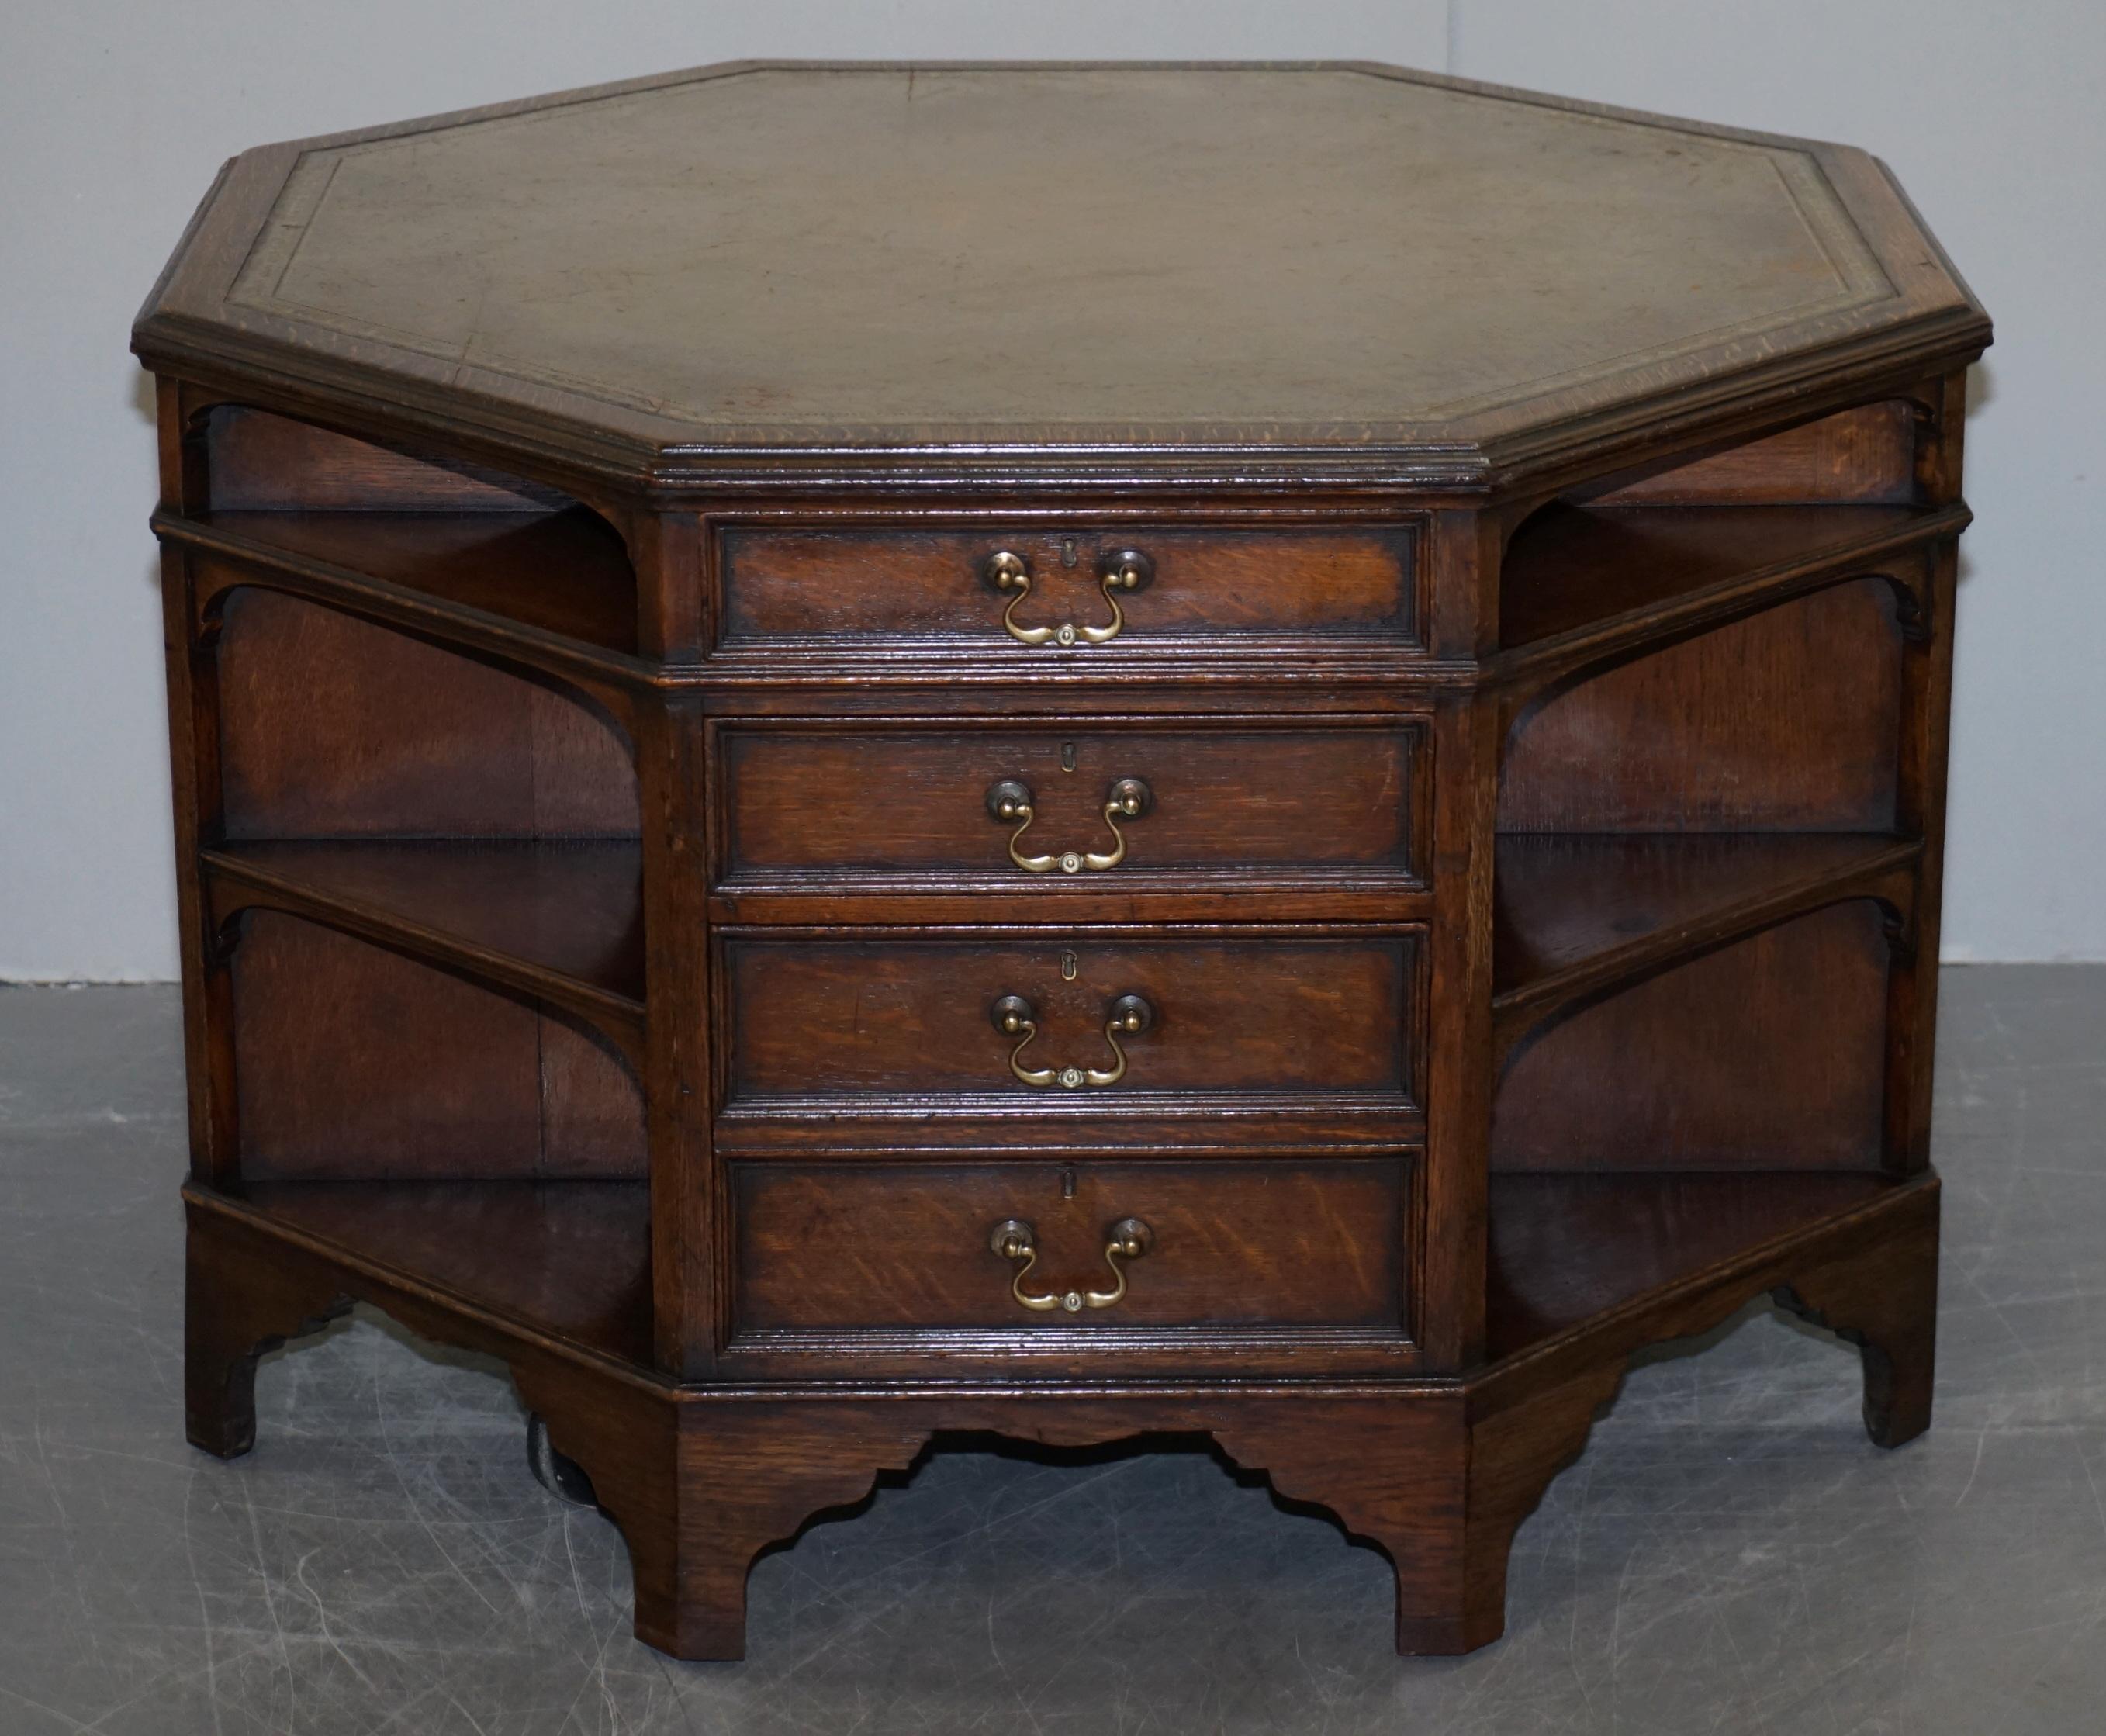 Late Victorian Harrods Antique English Library Two Person Octagonal Partner Desk Inc Bookcases